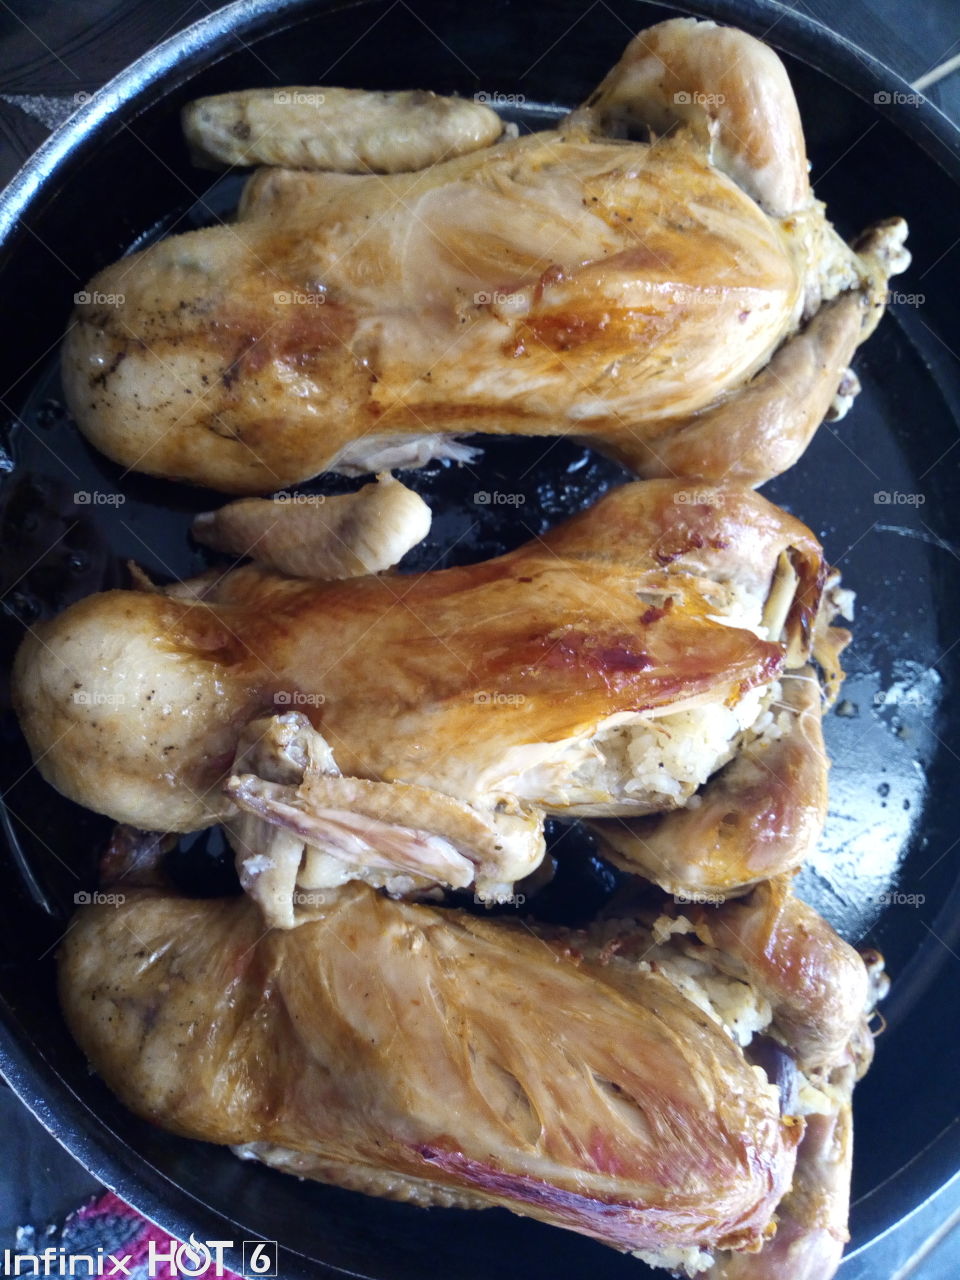 Three chicks stuffed and reddened with olive oil in an Egyptian way